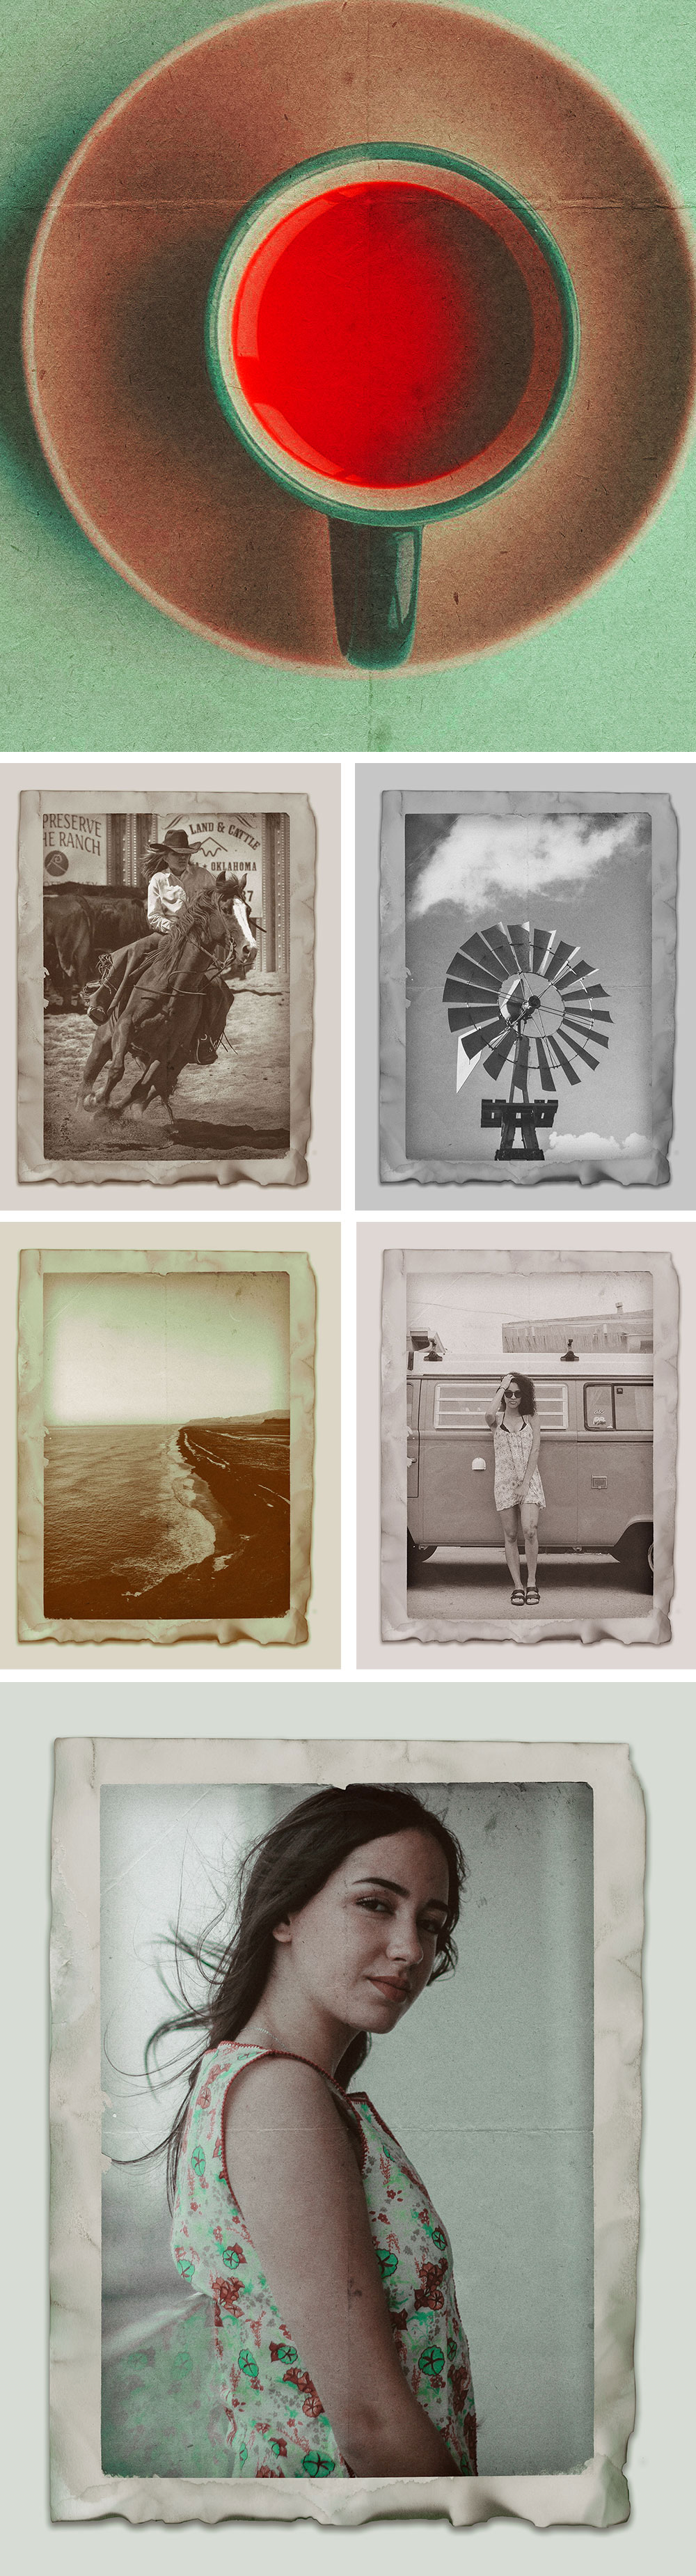 Vintage Photo Effects PSD